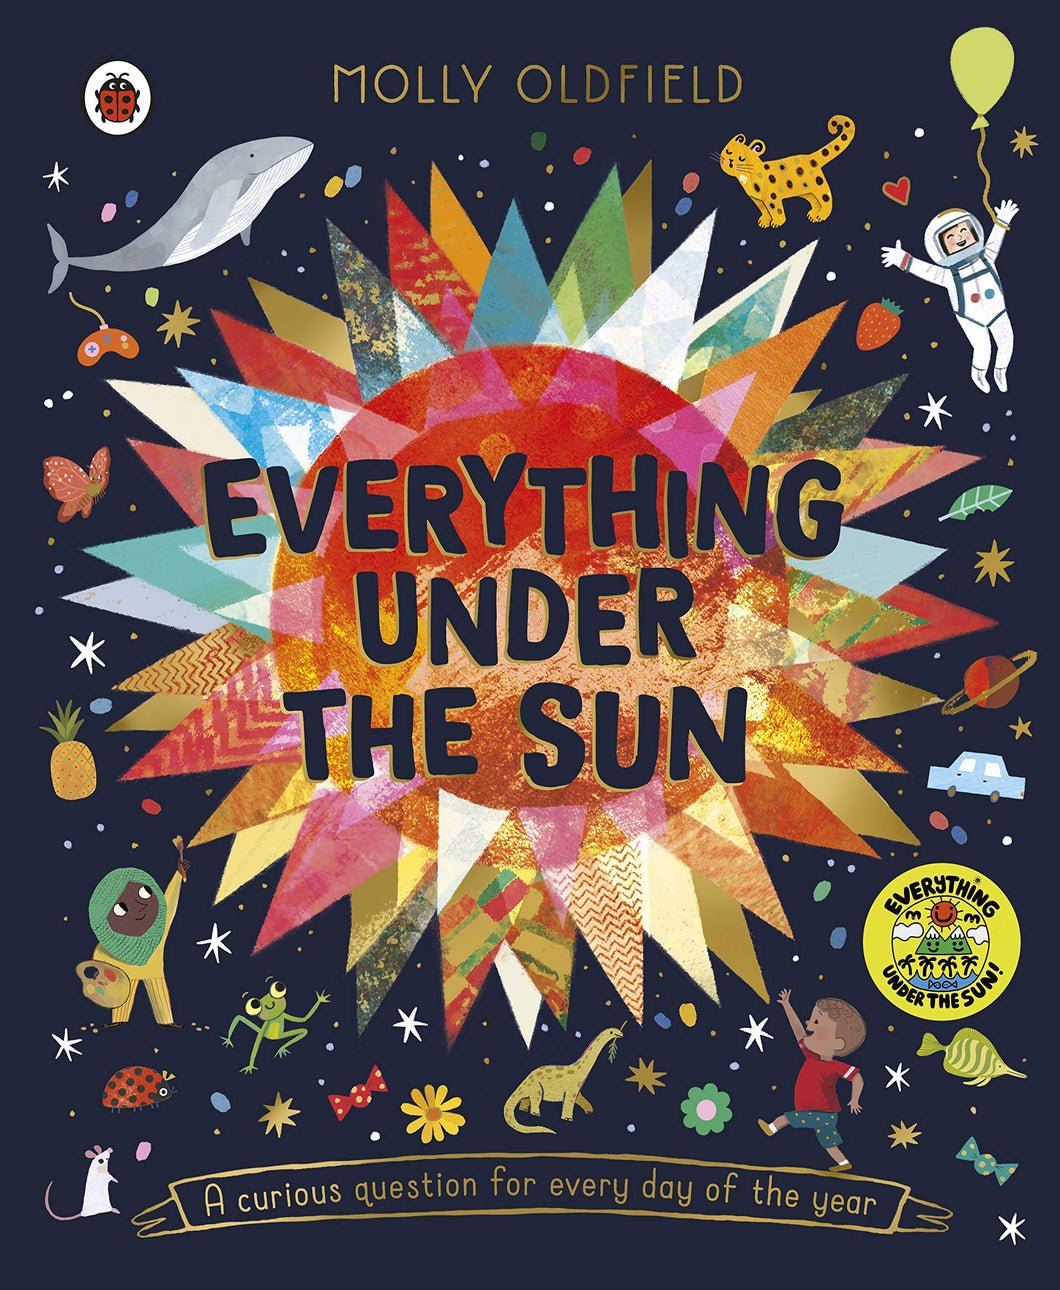 Book cover is dark blue with the title over a colourful sun. Around the sun are illustrations of a light-skinned astronaut, a dark-skinned artist in a headscarf, flowers, a medium-skinned boy, a whale, and other animals. The tagline reads 'A curious question for every day of the year'.